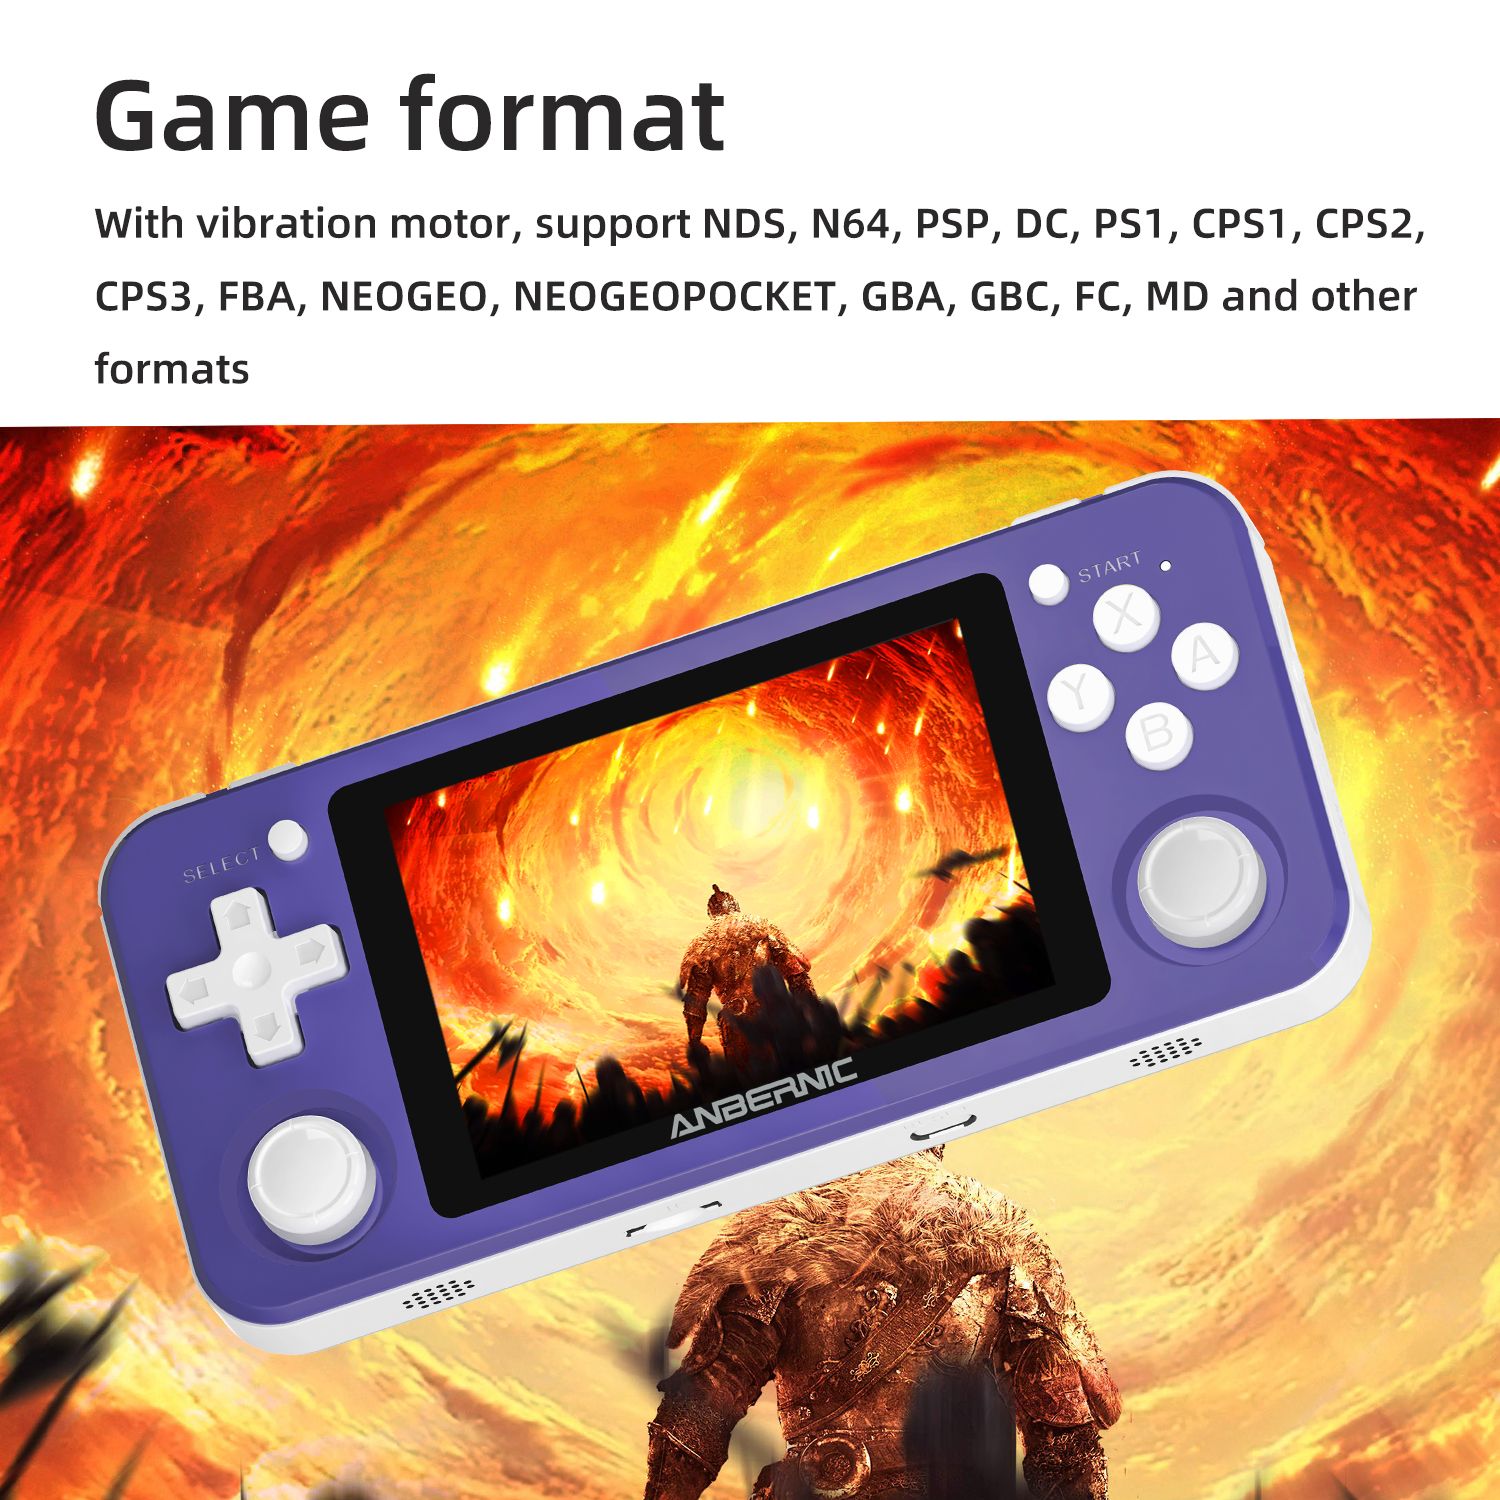 ANBERNIC-RG351P-64GB-2500-Games-IPS-HD-Handheld-Game-Console-Support-for-PSP-PS1-N64-GBA-GBC-MD-NEOG-1746202